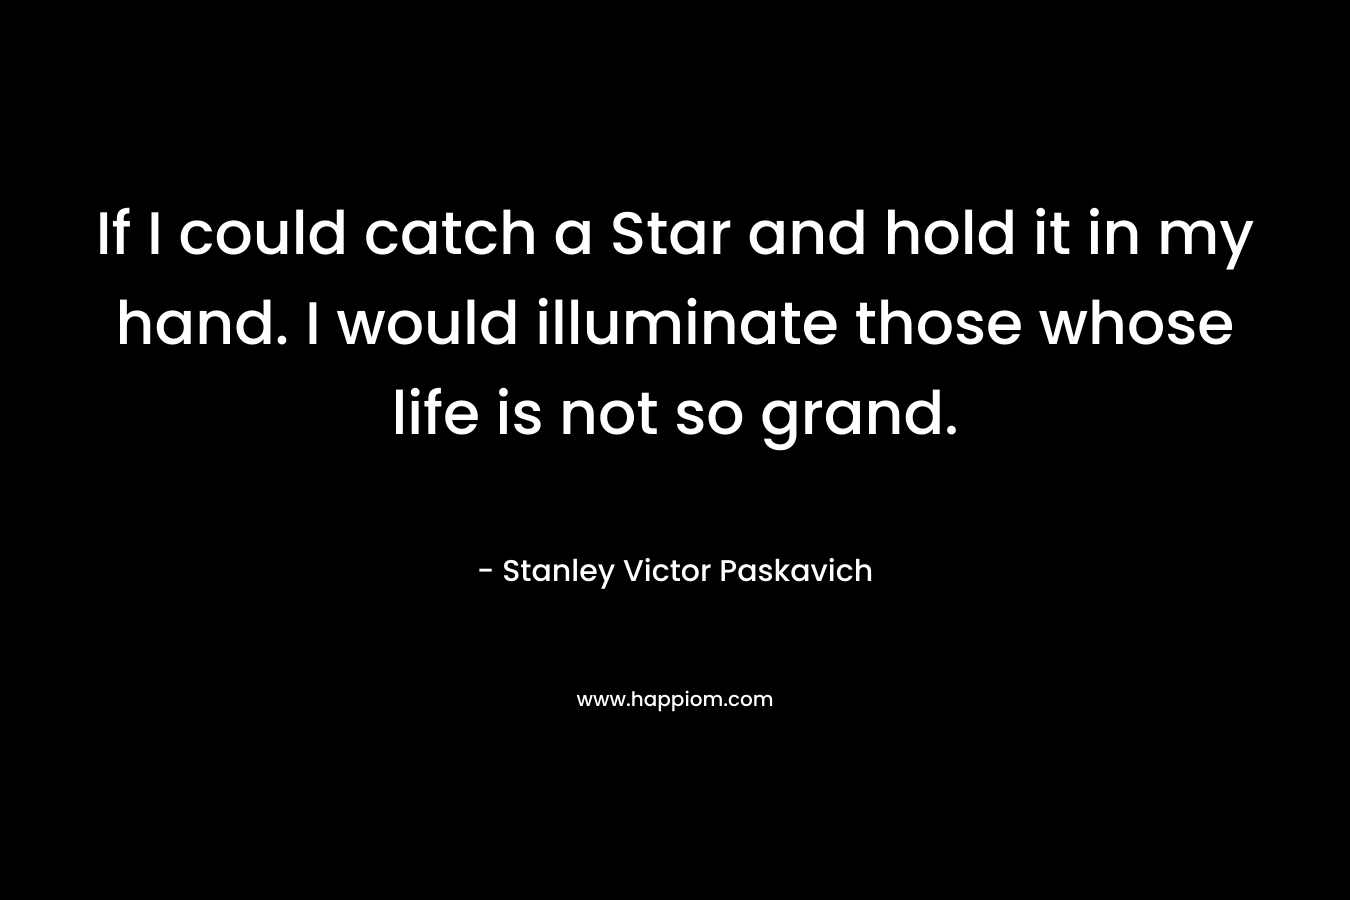 If I could catch a Star and hold it in my hand. I would illuminate those whose life is not so grand.